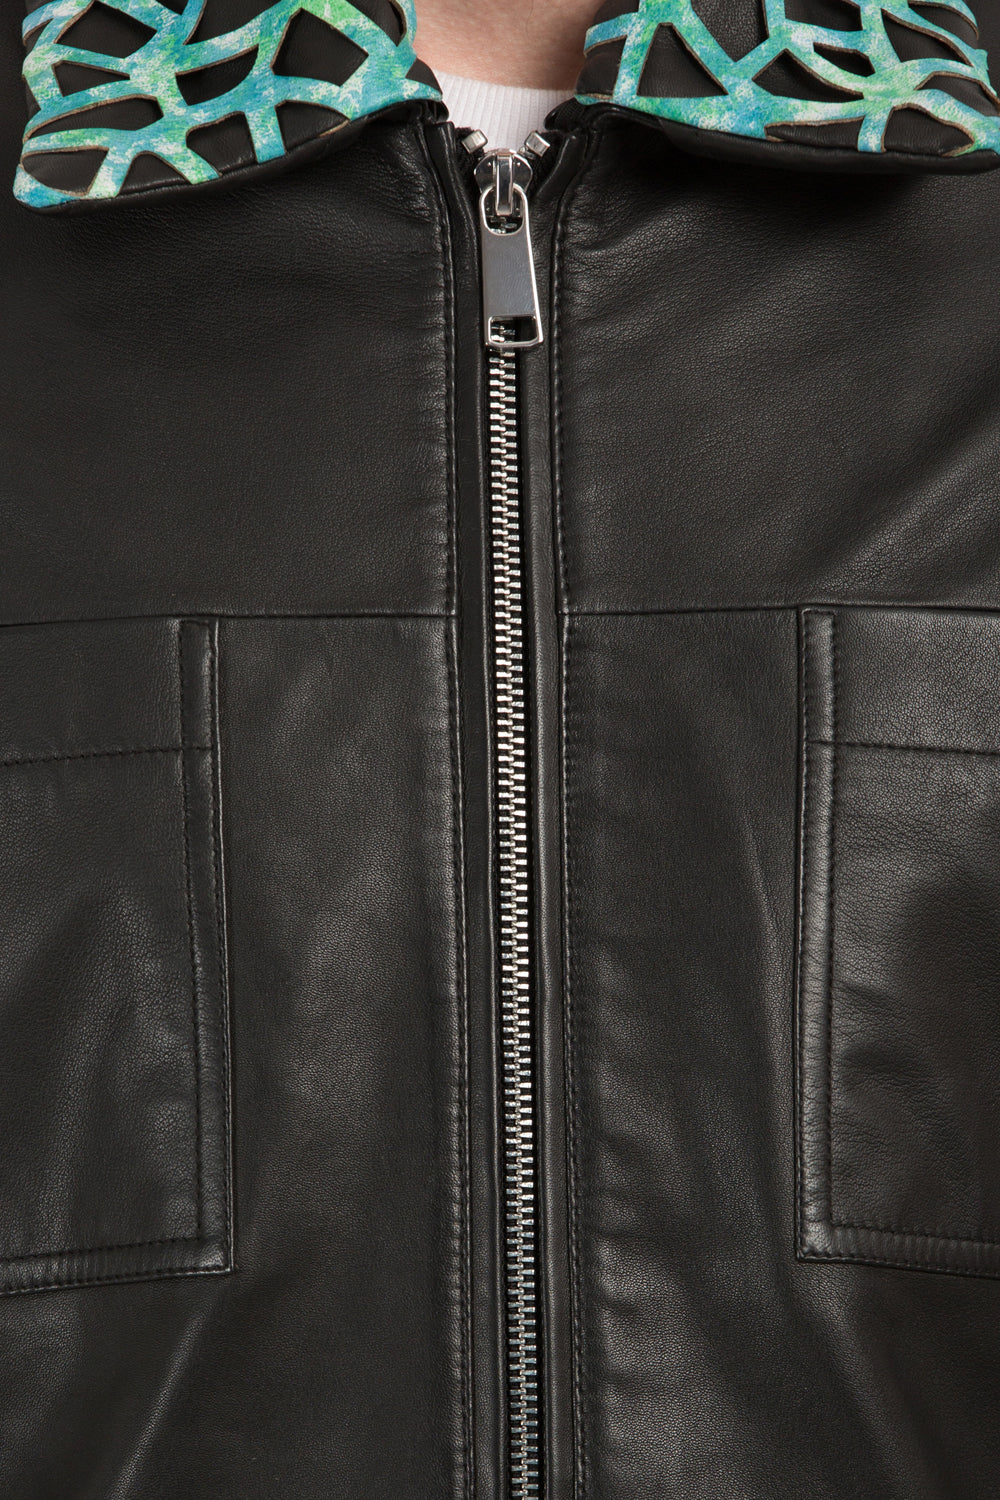 Justanned Removable Collar Leather Jacket